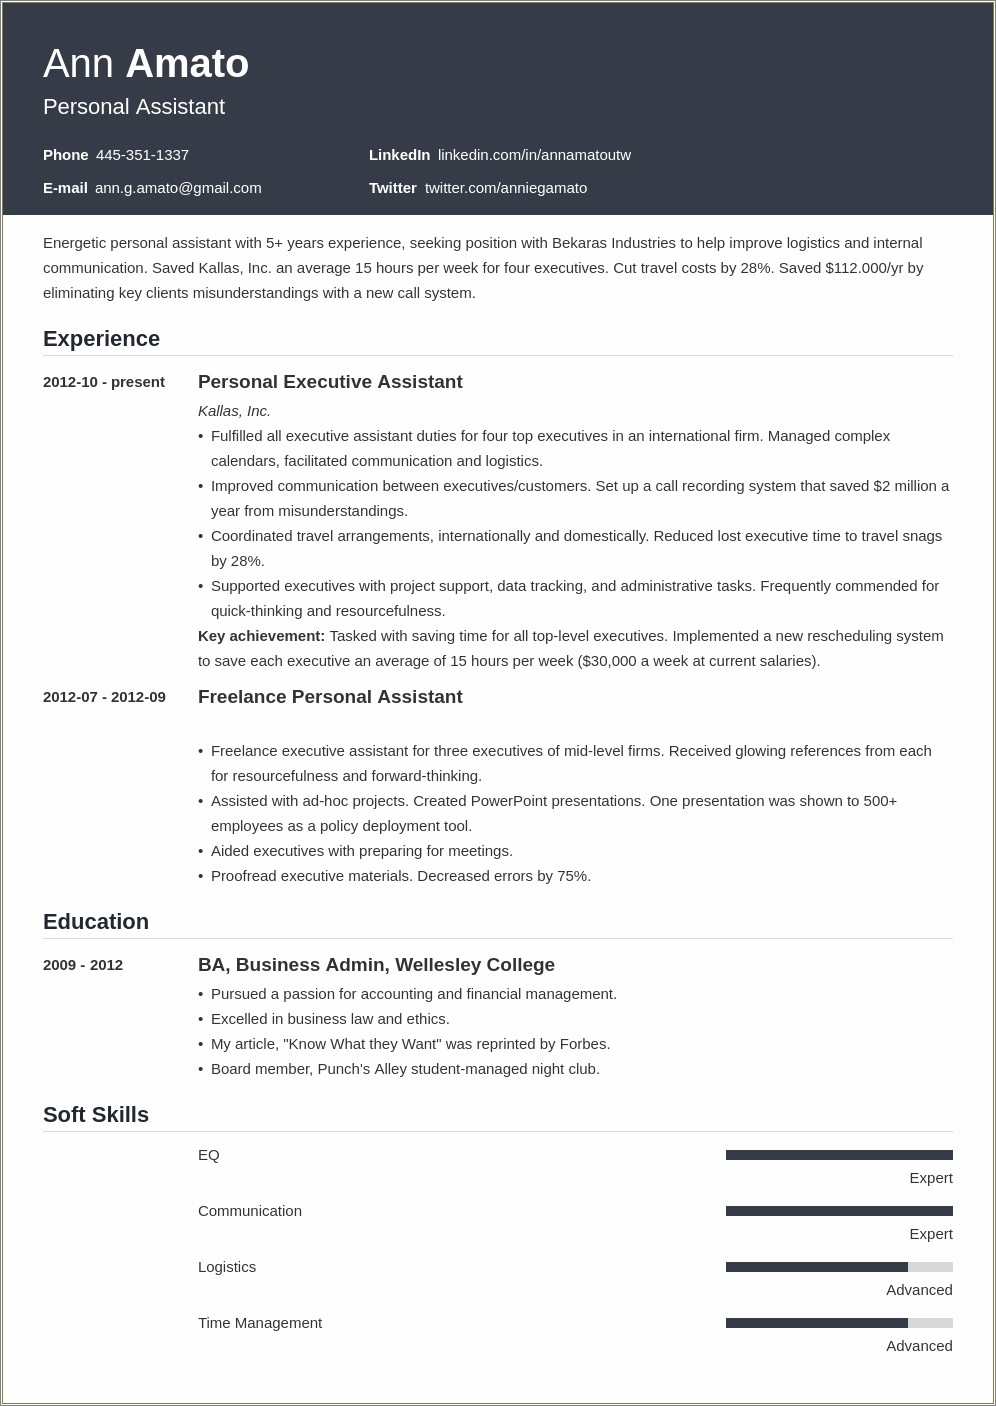 Sample Resume Format For Job Application With Experience